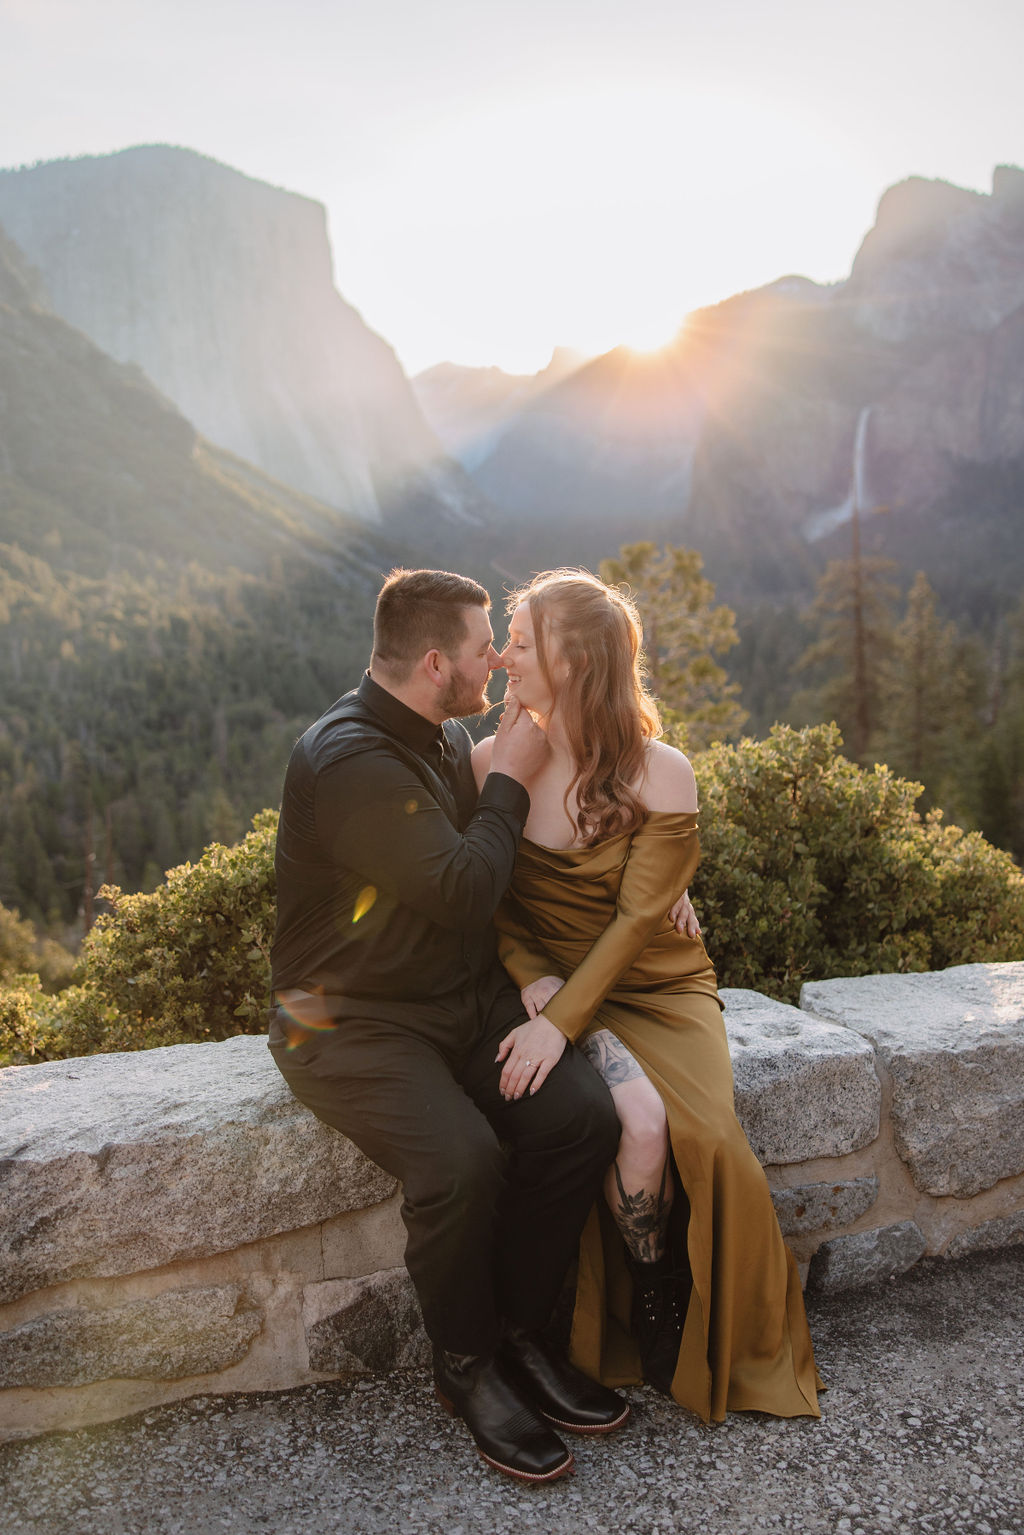 Couple embracing on a cliff with a scenic view of yosemite valley in the background. the woman wears a gold dress, and the man is in a dark suit at their yosemite engagement session